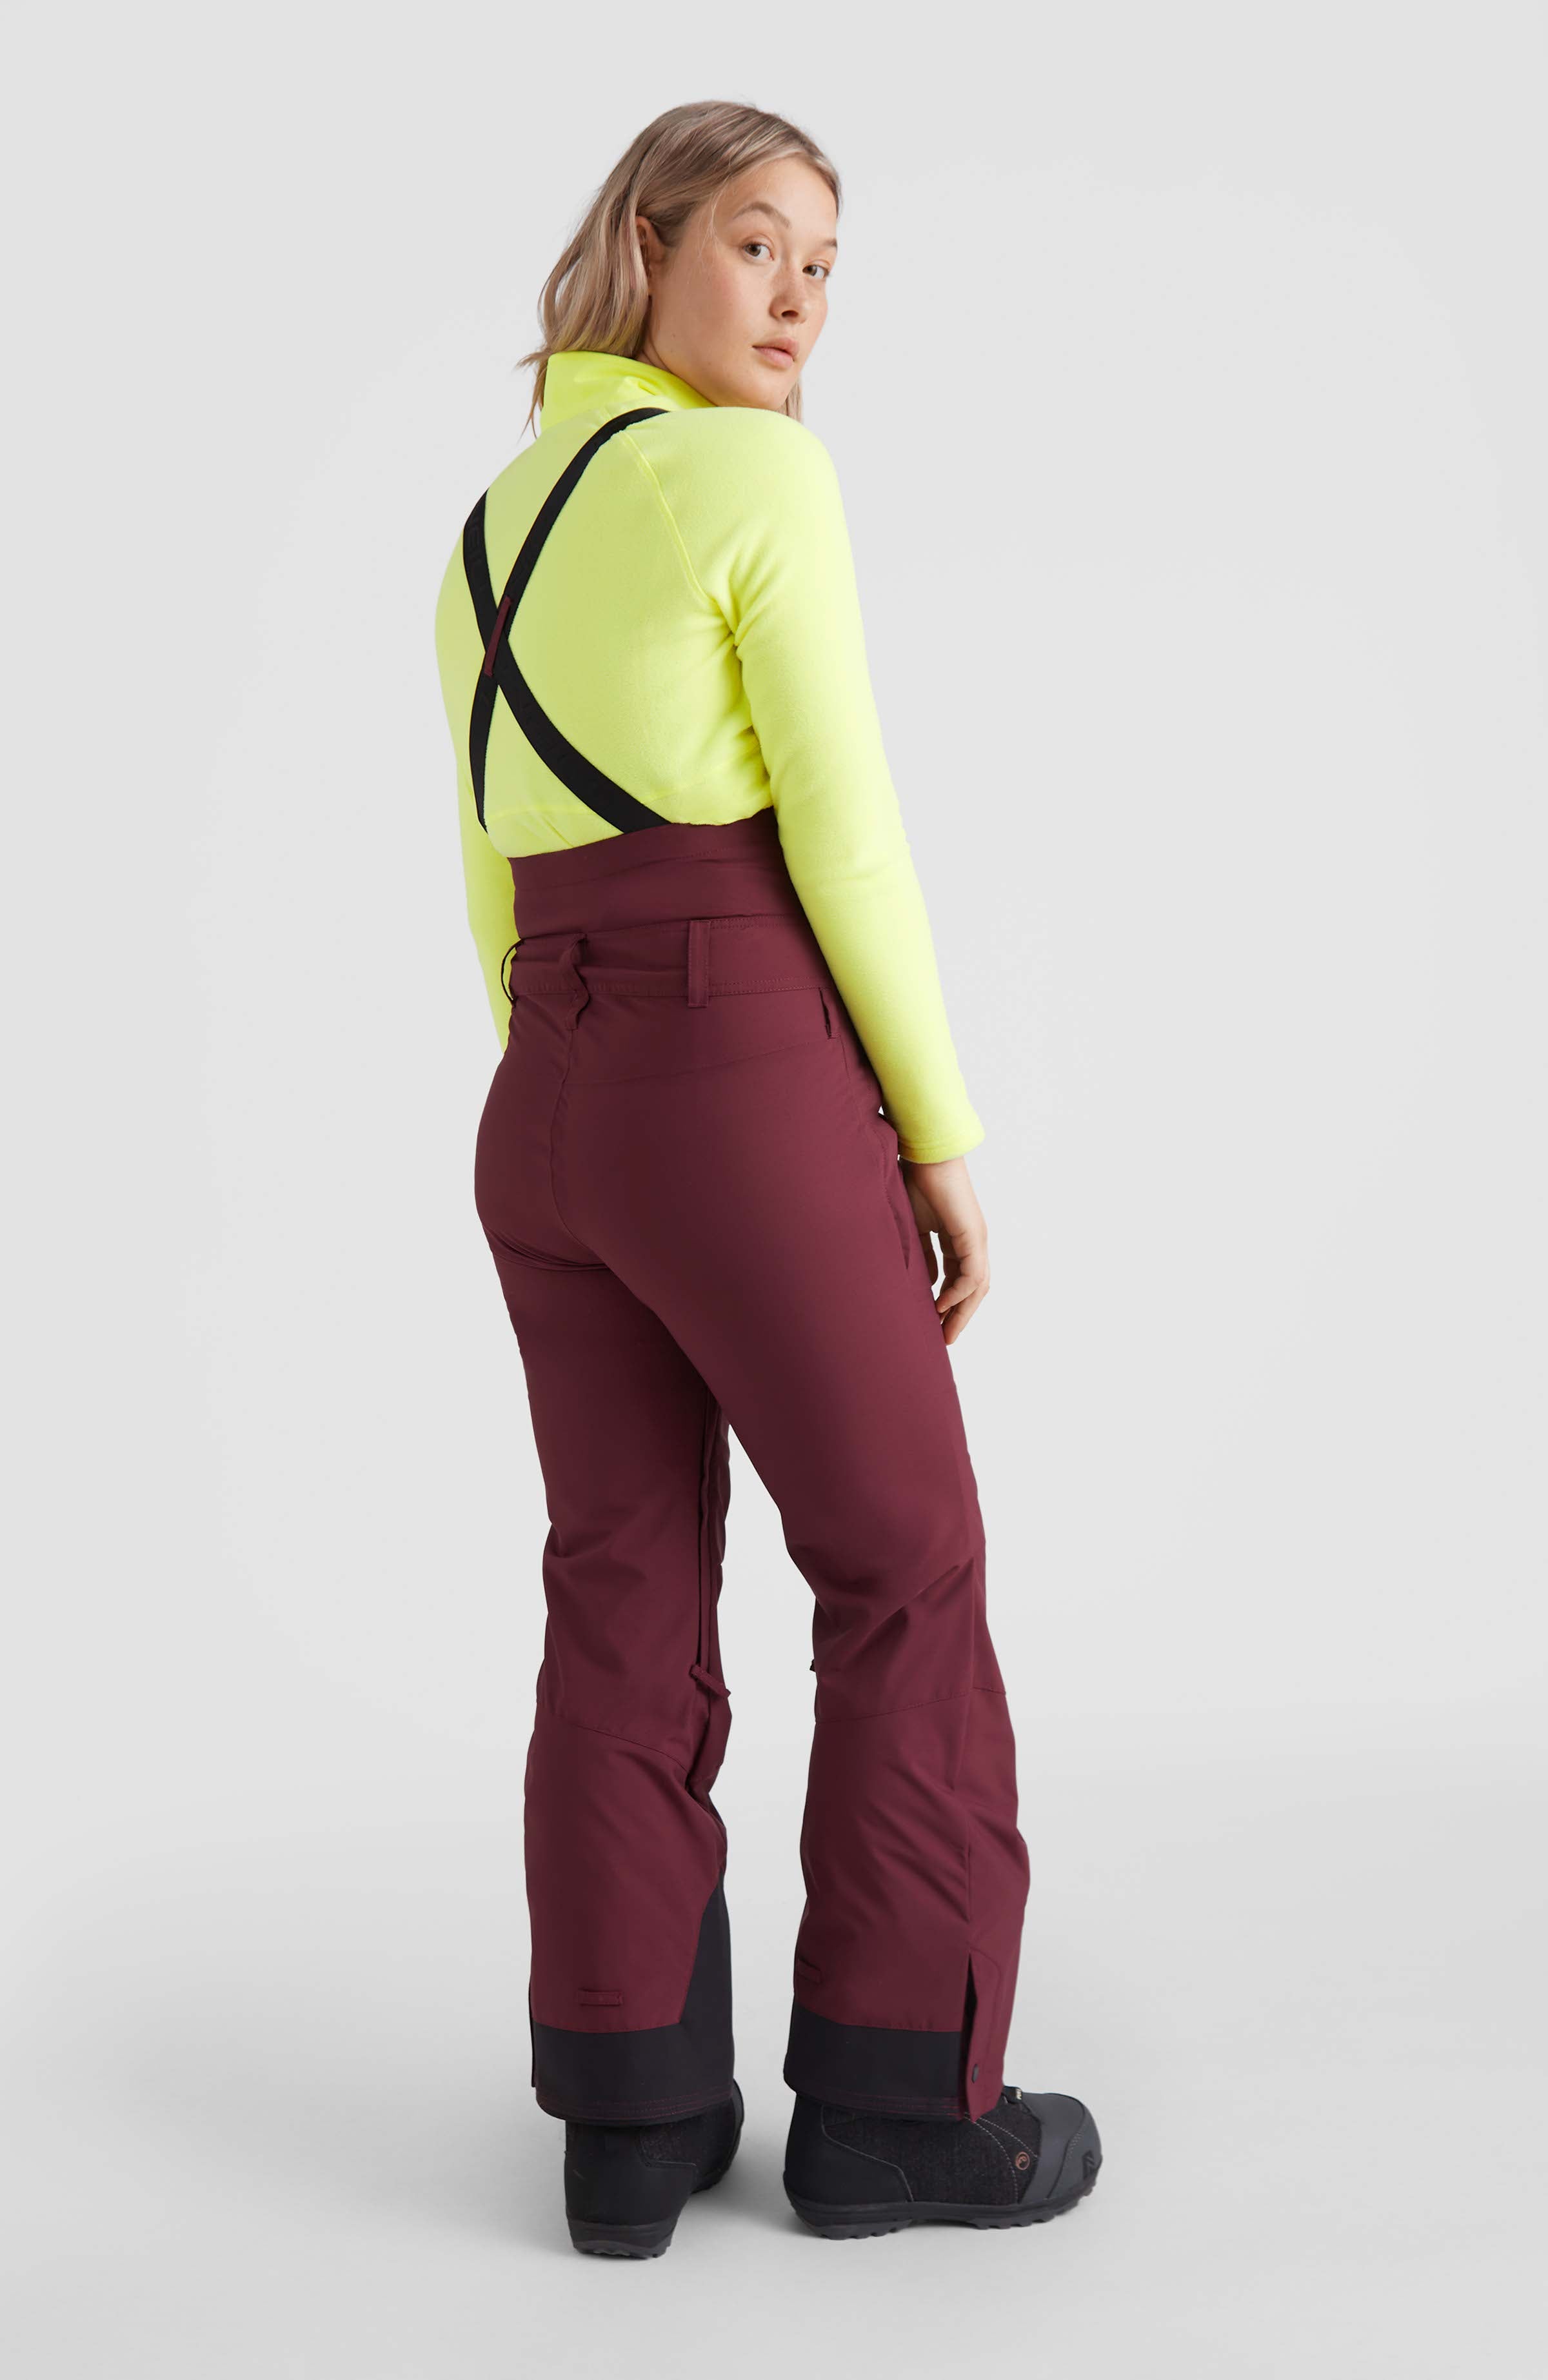 The 12 Best Ski Pants for Women in 2022